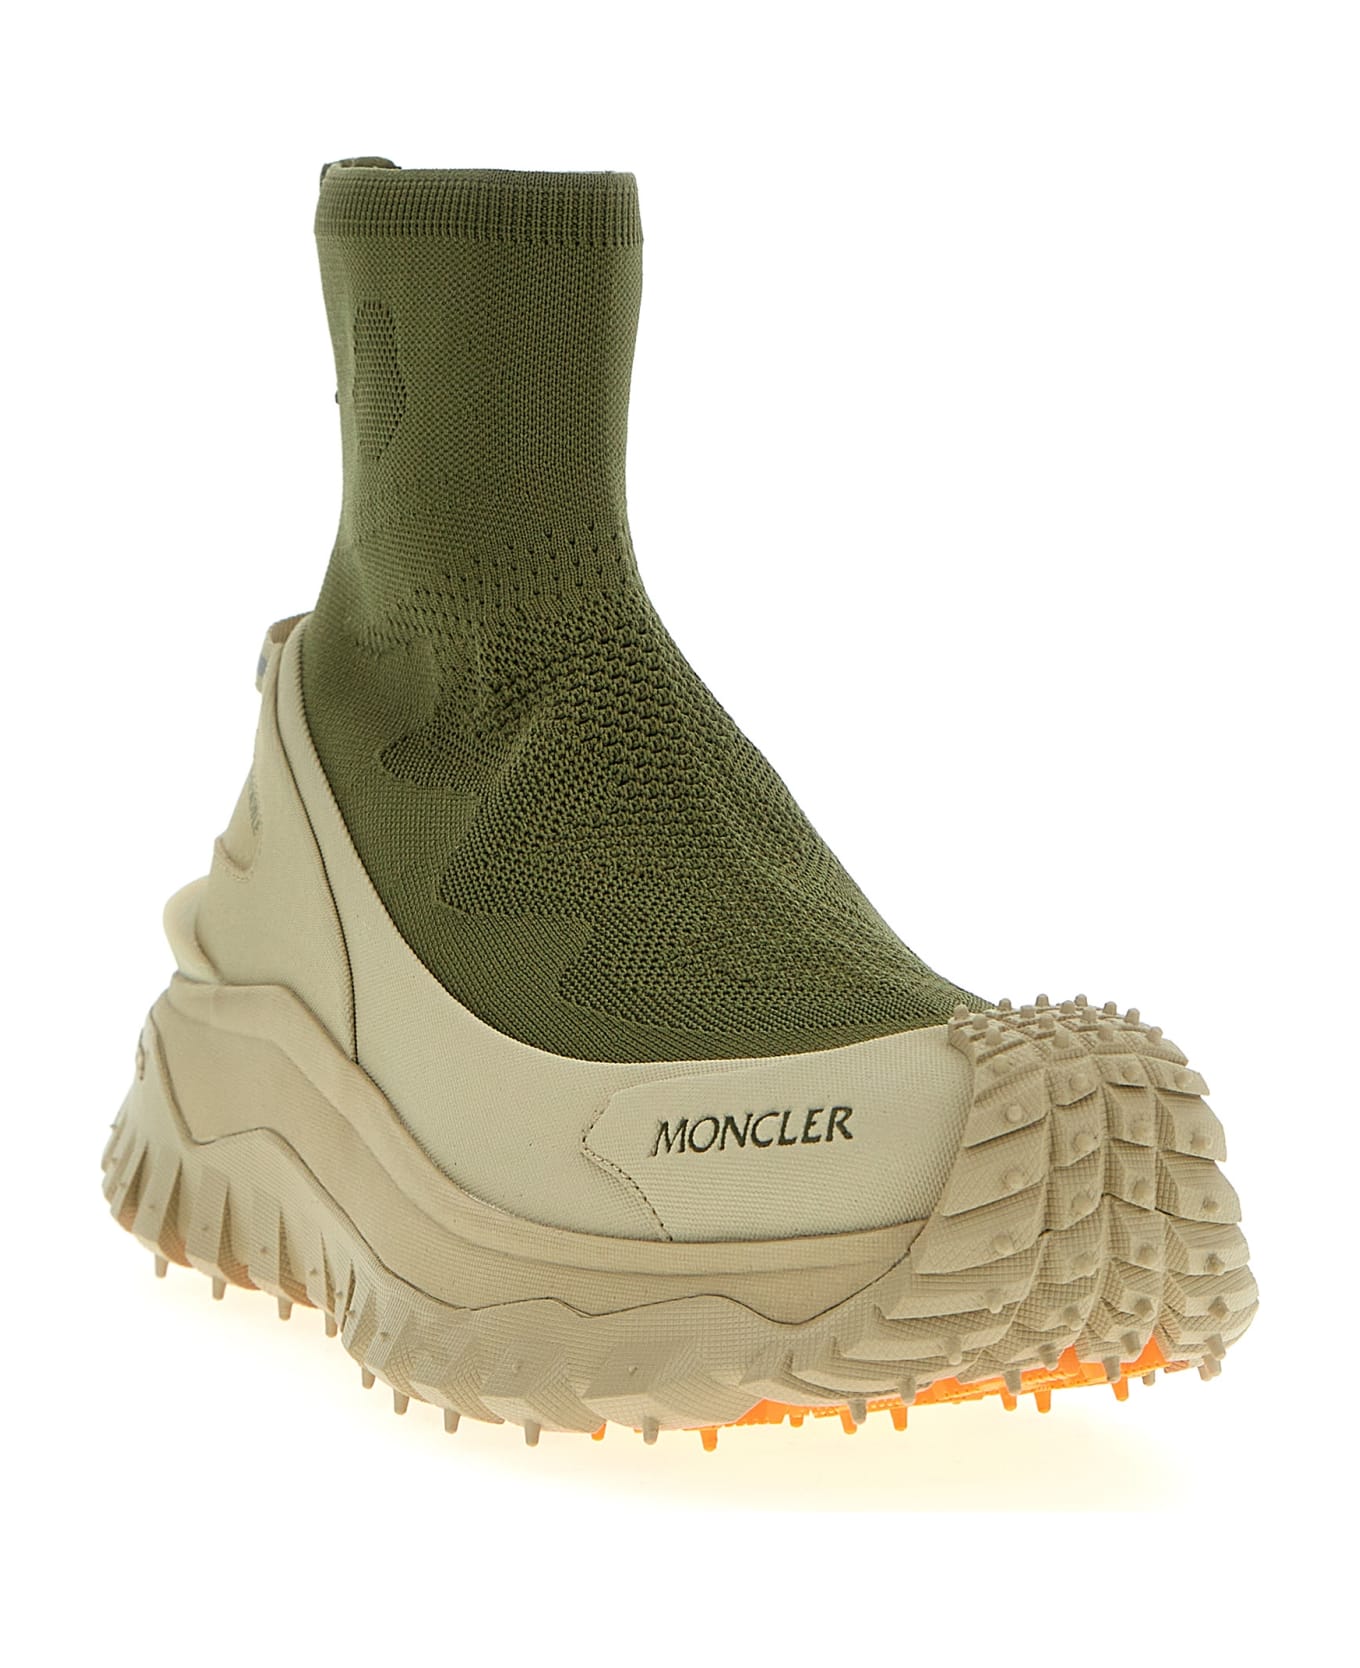 Moncler 'trailgrip Knit' Sneakers | italist